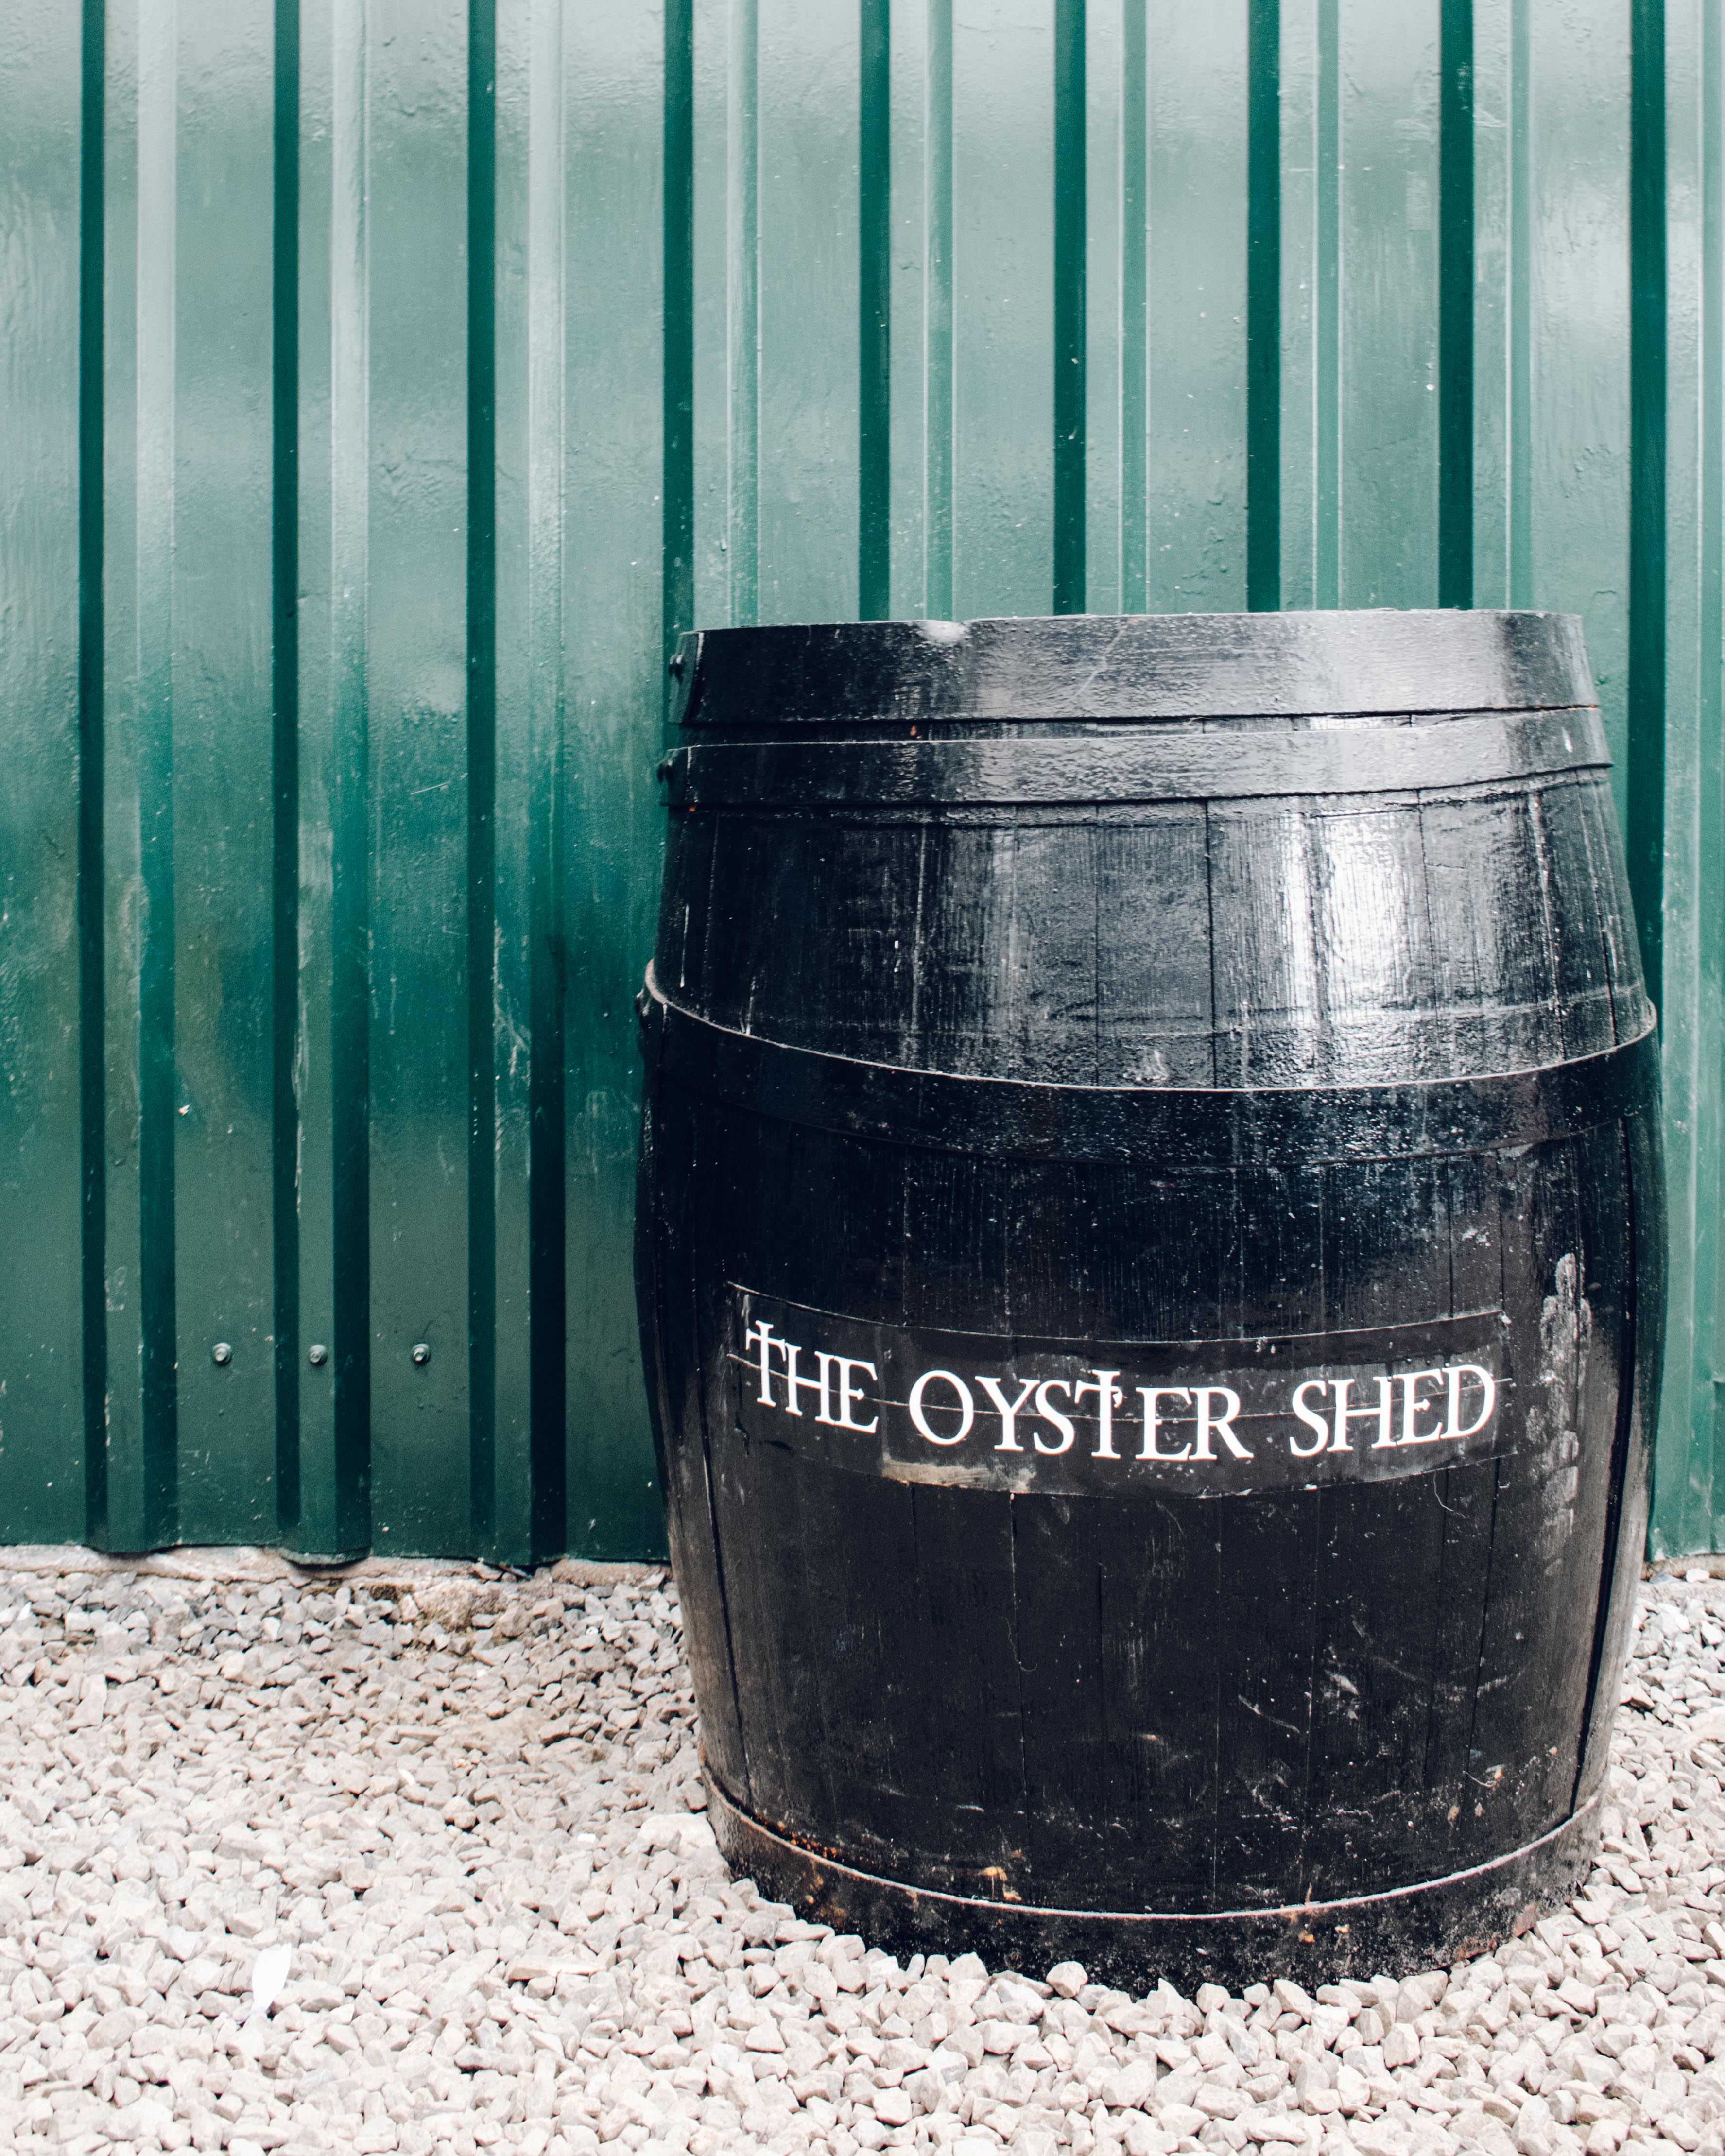 The Oyster Shed, Skye